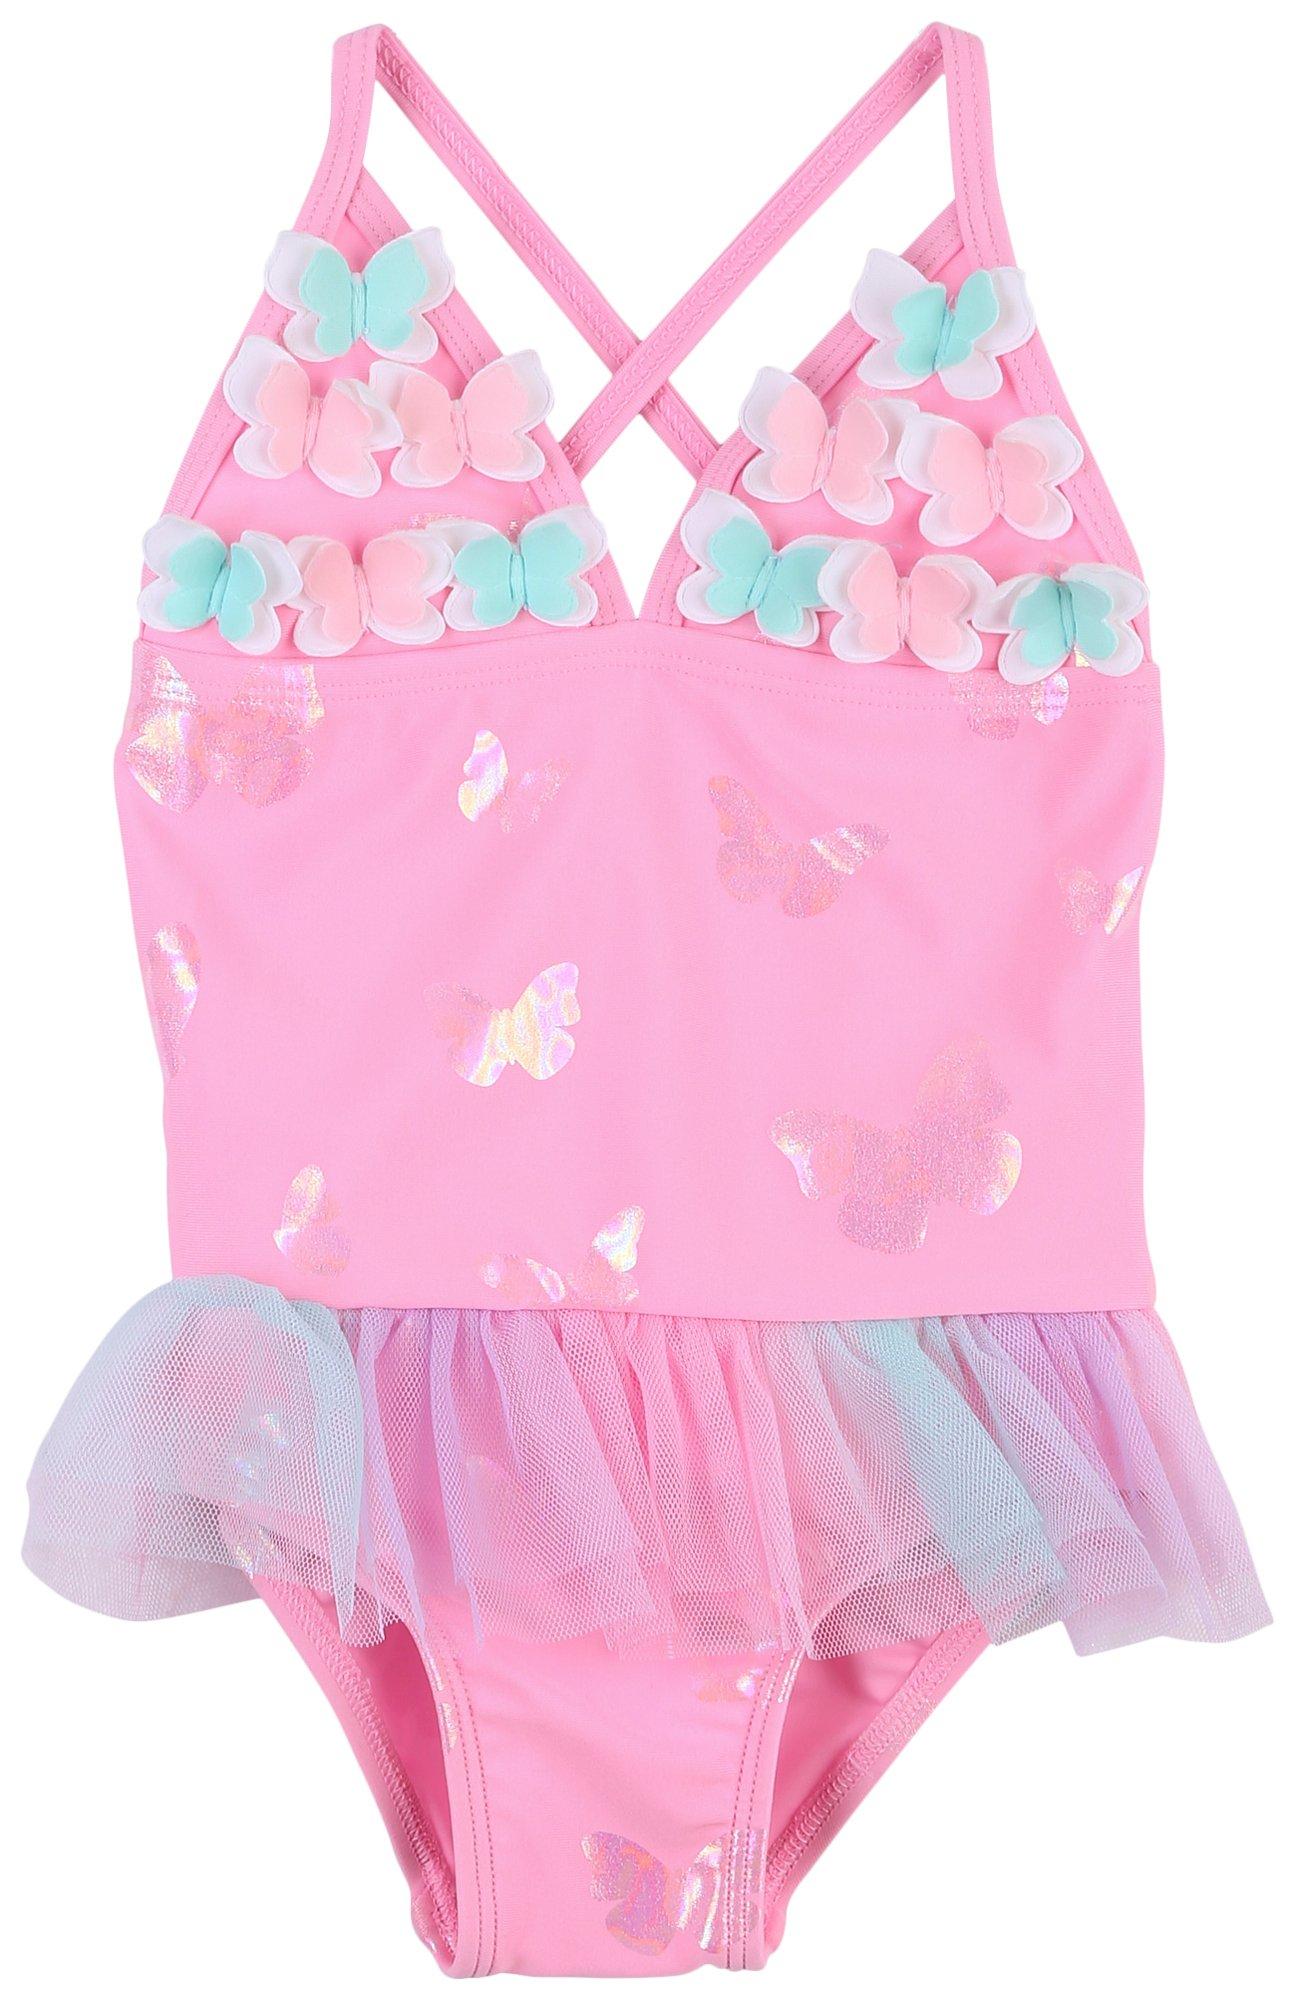 Floatimini Toddler Girls One Pc. Pink Floral Swimsuit